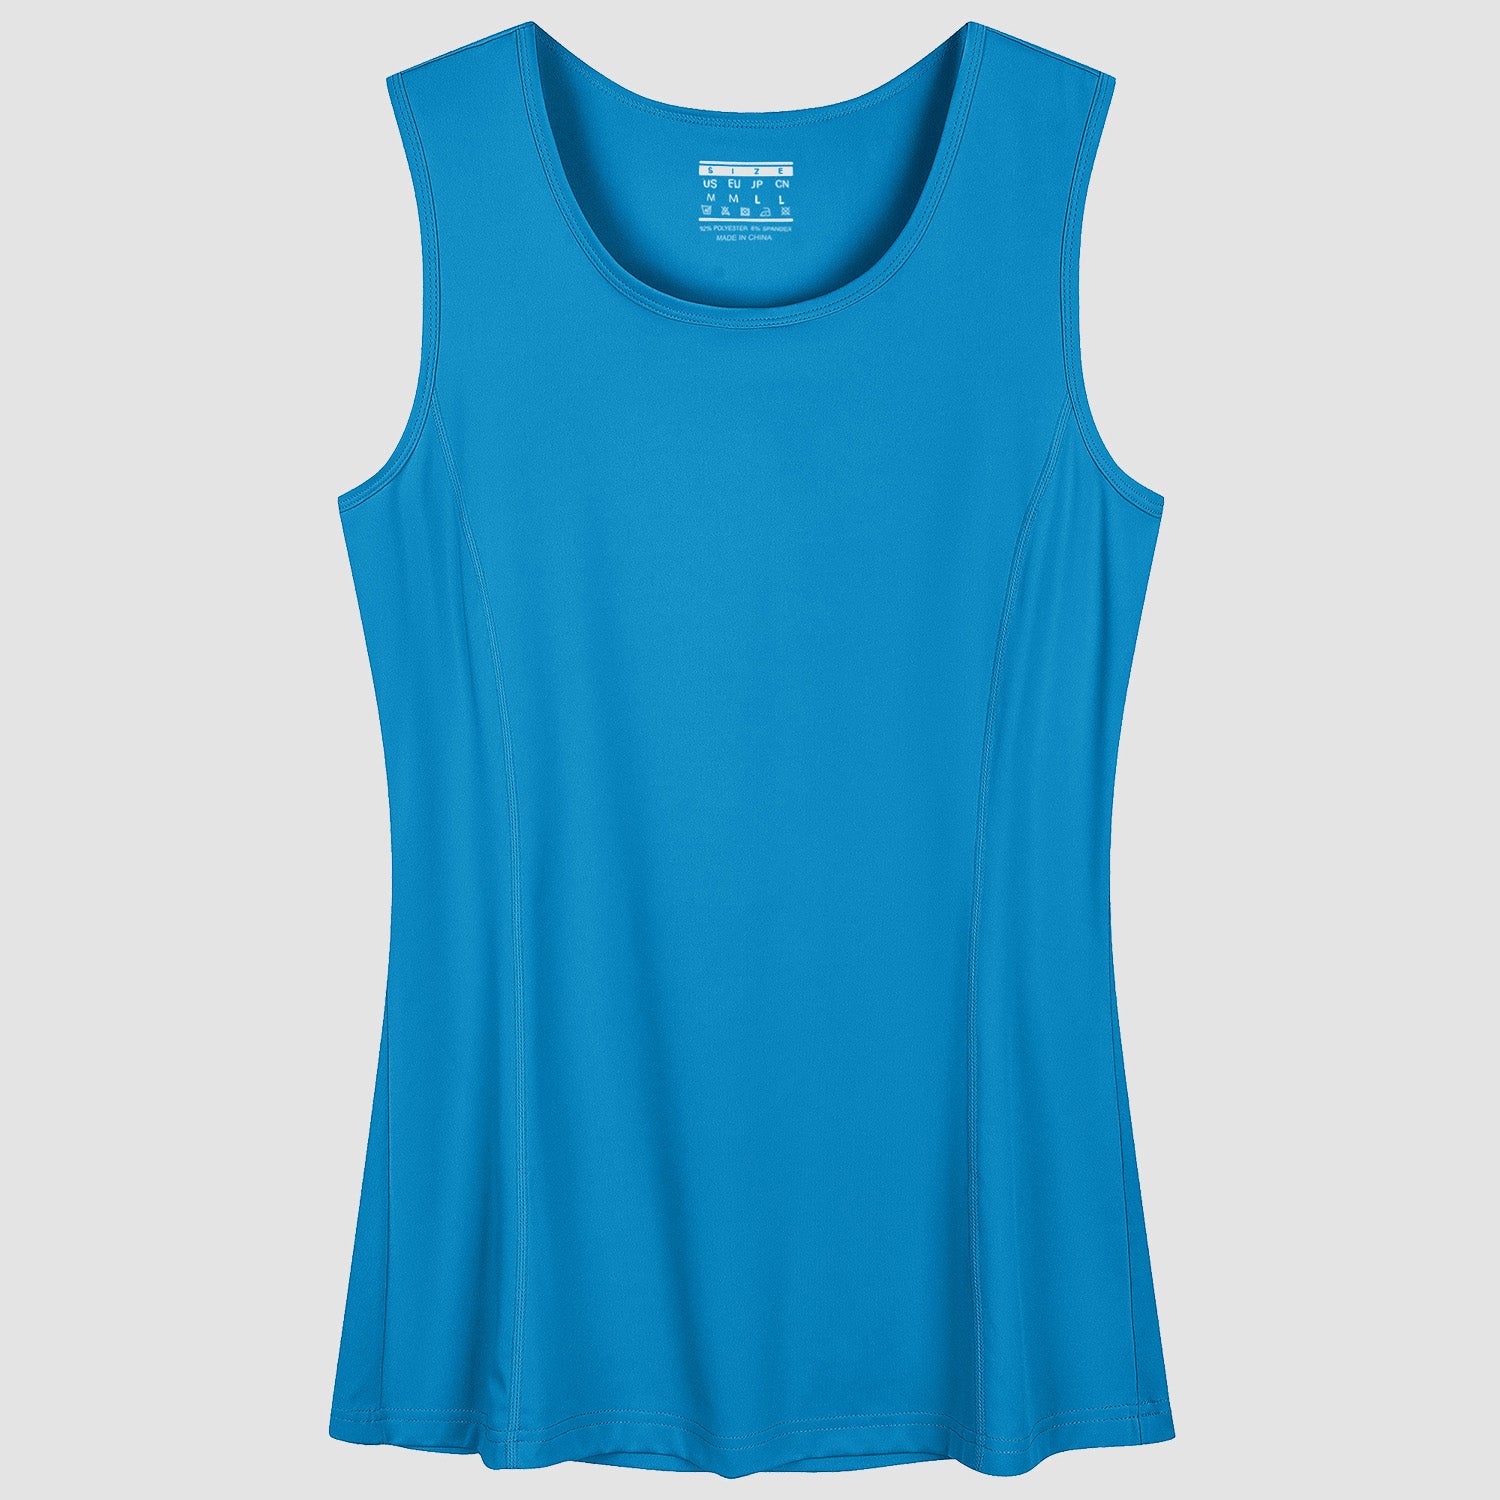 Spandex Athletic Tank Tops for Women